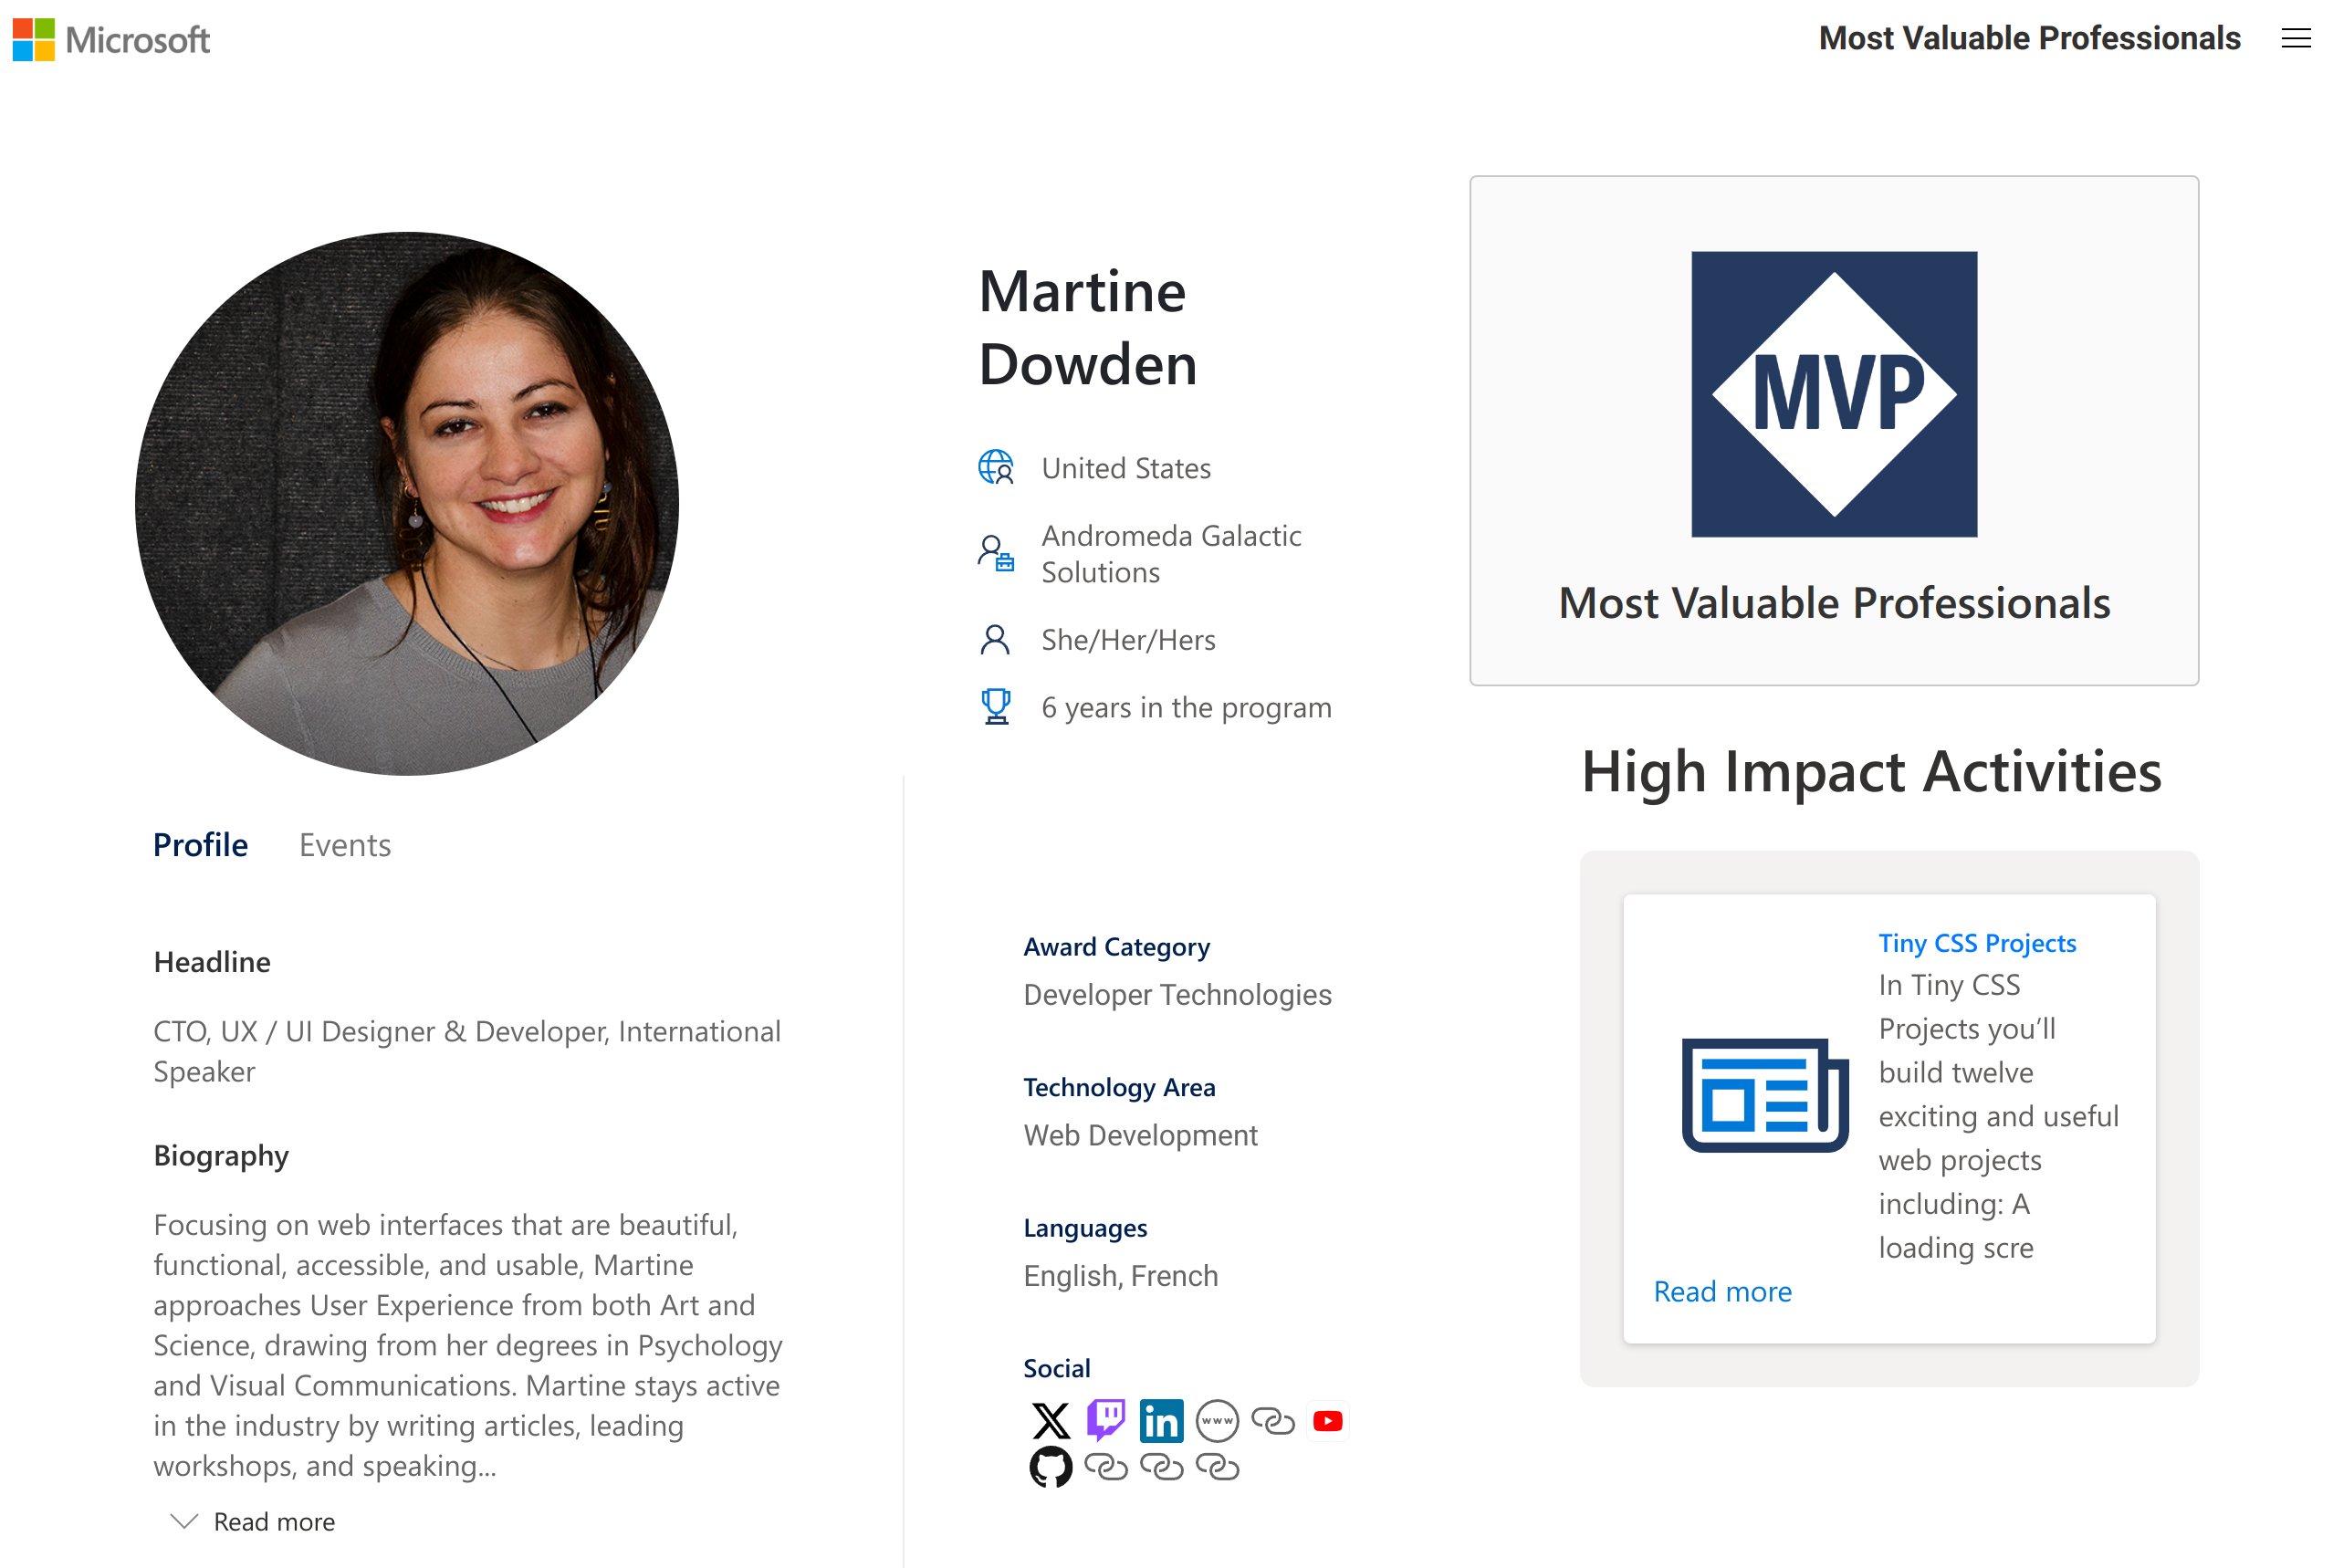 Screenshot of Martine Dowden's MVP profile showing her current award category as Developer Technologies and technology are as Web Development.